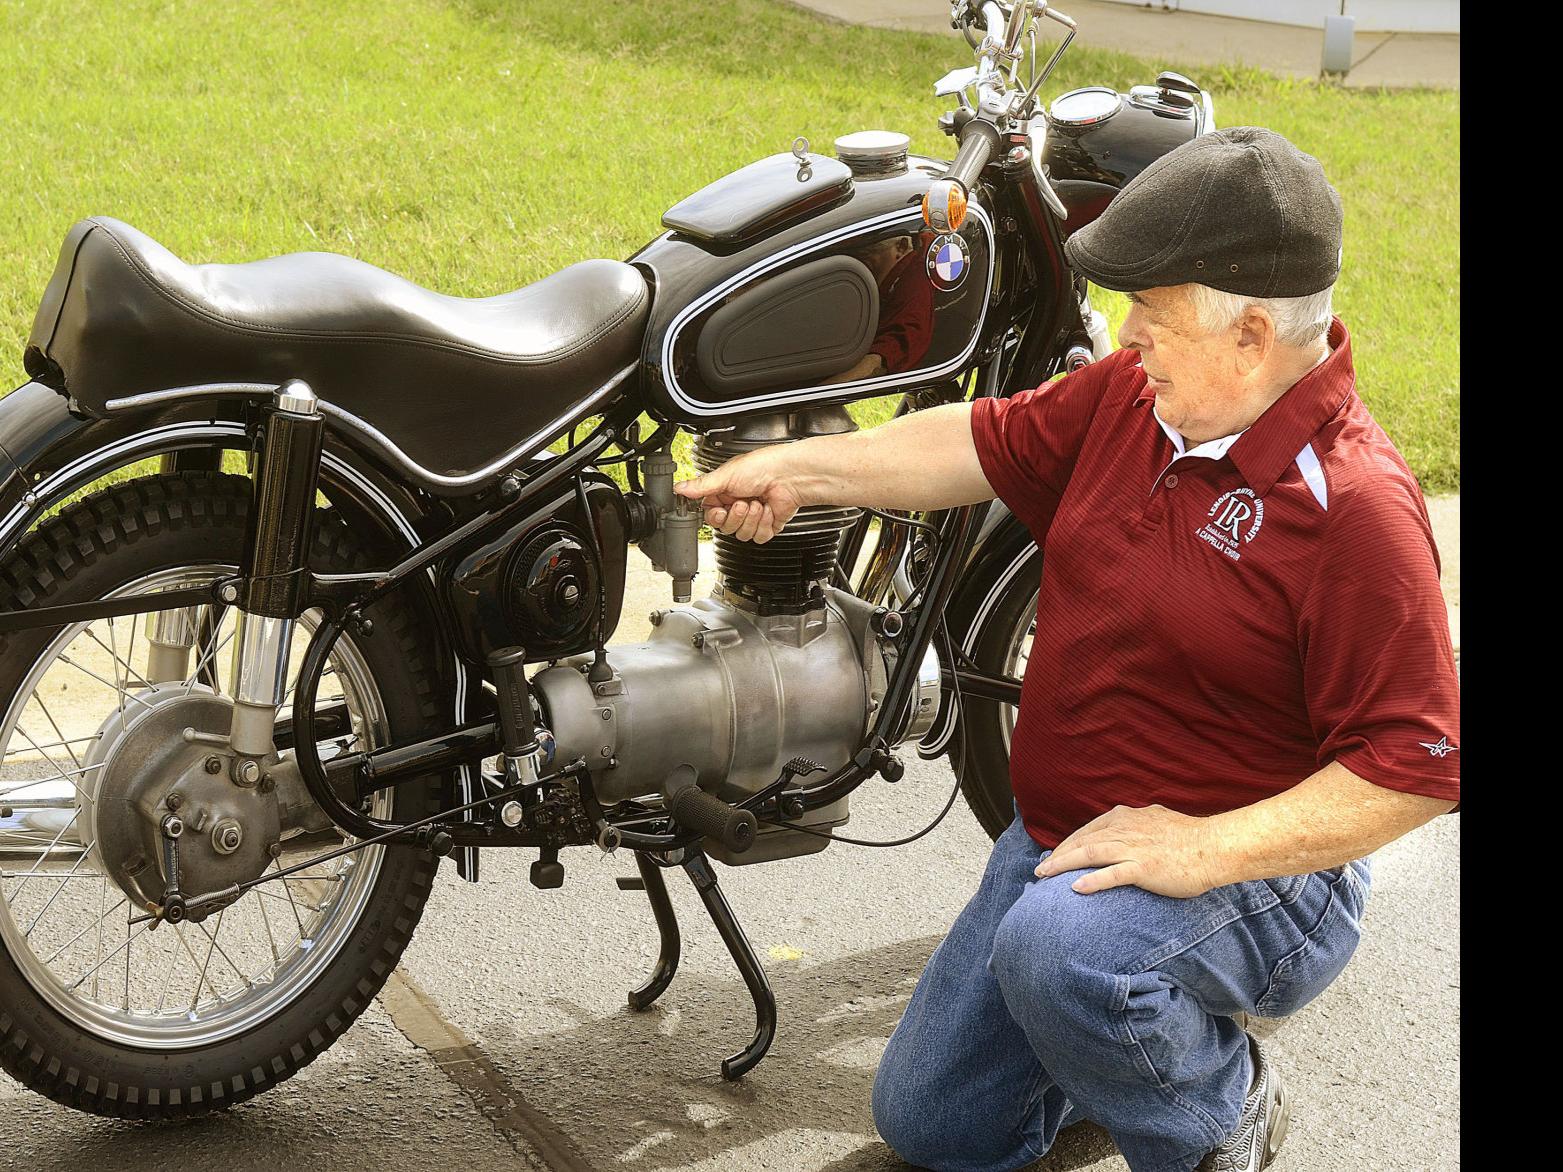 1956 Bmw Motorcycle Turns Heads In Maiden Latest Headlines Hickoryrecord Com